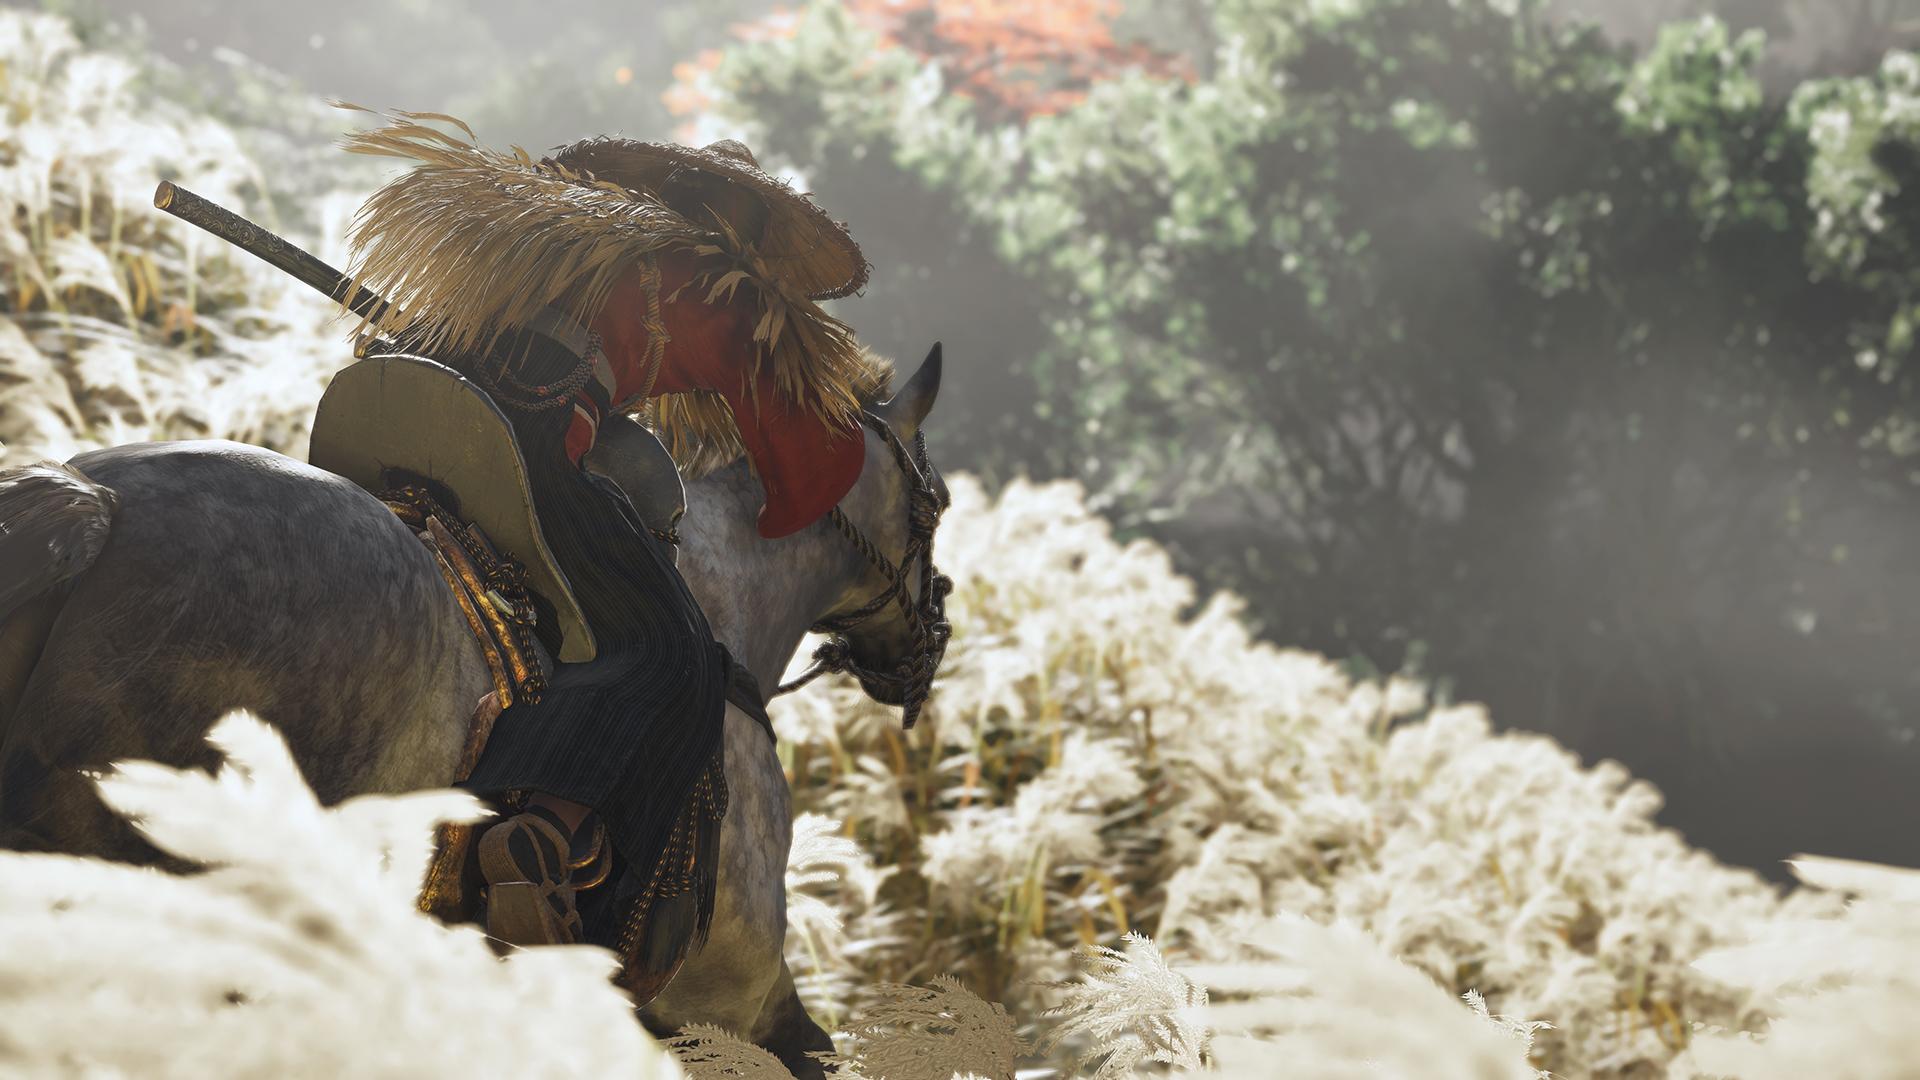 PewDiePie Explains Why Ghost of Tsushima is Better Than Last of Us 2